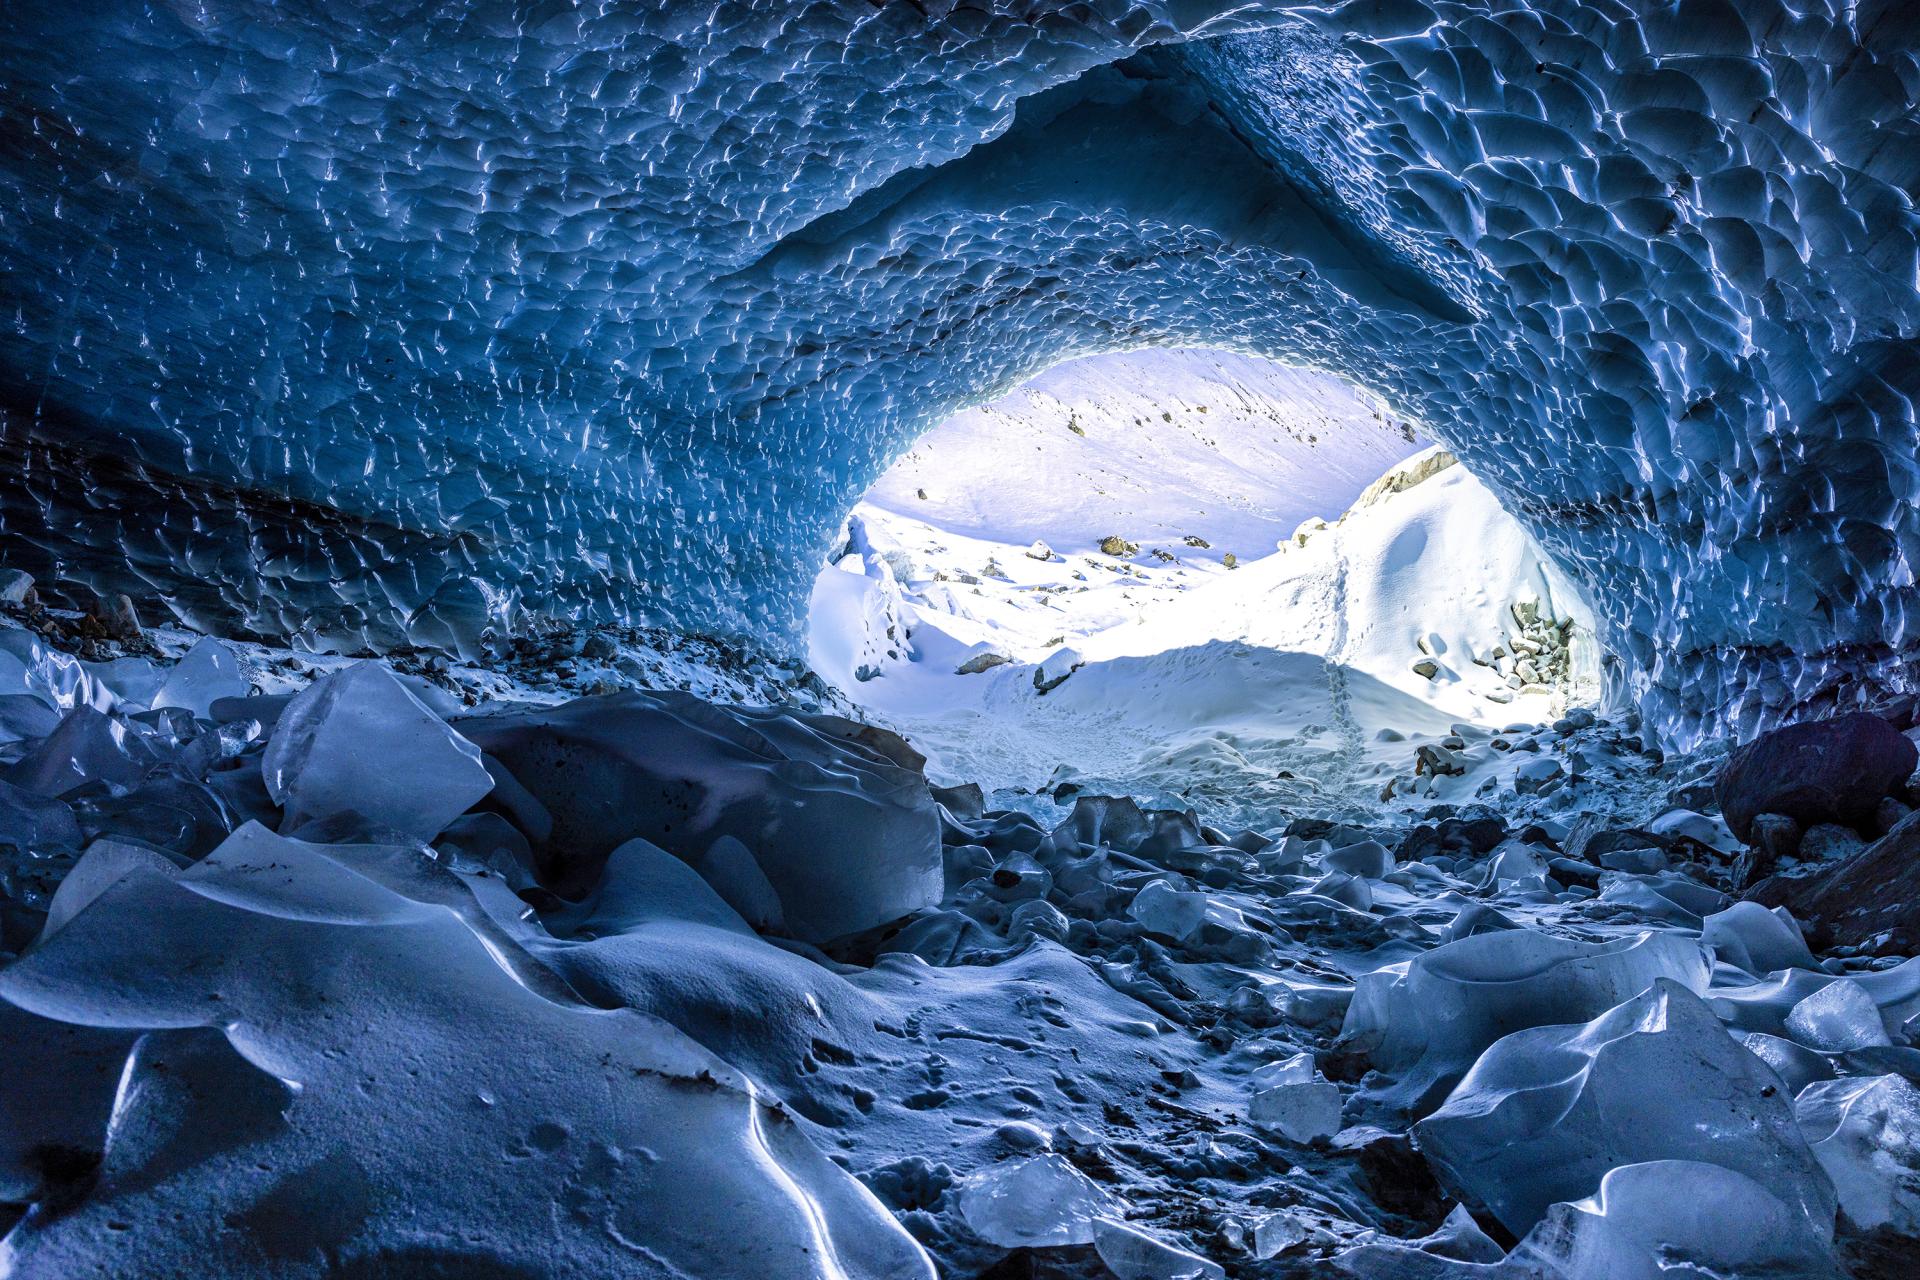 London Photography Awards Winner - the Ice cave